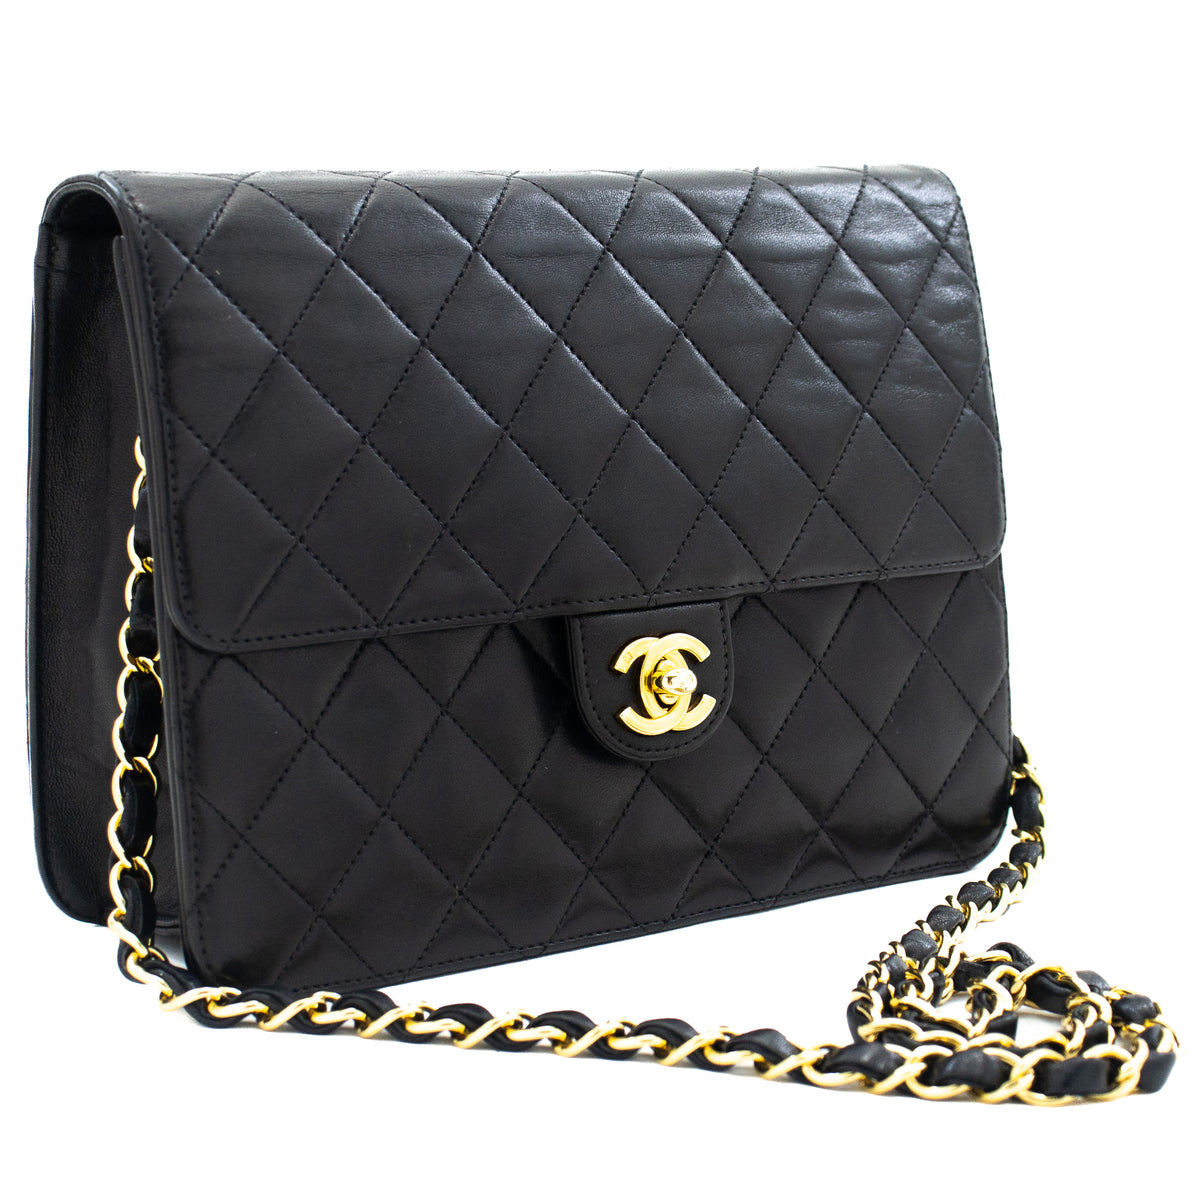 Chanel 2.55 Double Flap Small Chain Shoulder Bag Black Lambskin H21